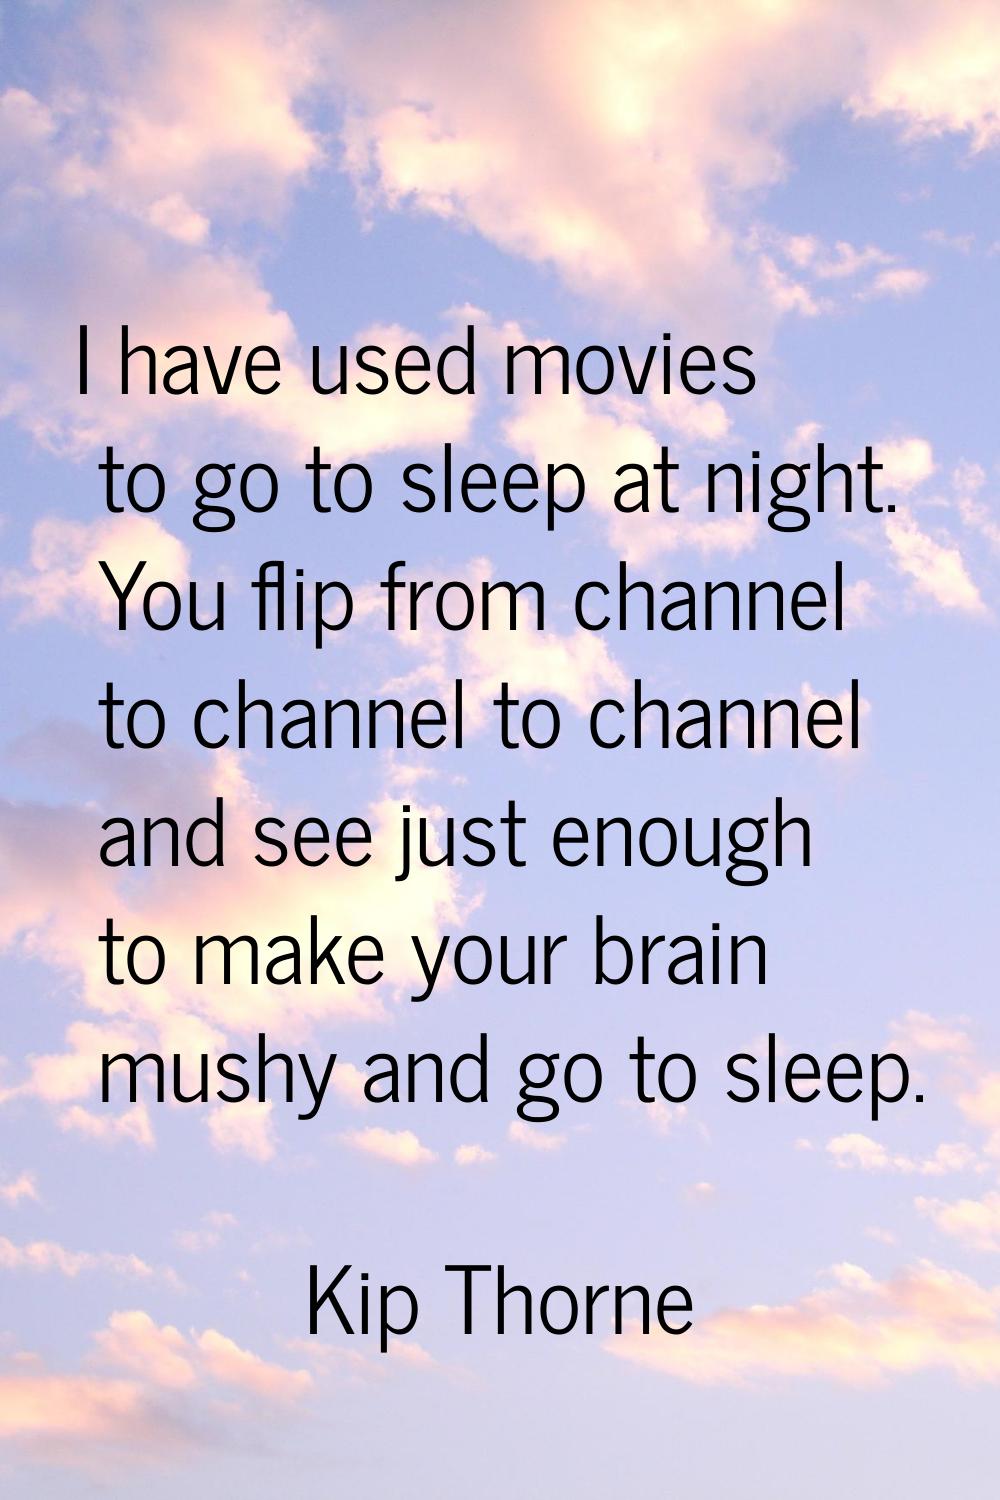 I have used movies to go to sleep at night. You flip from channel to channel to channel and see jus